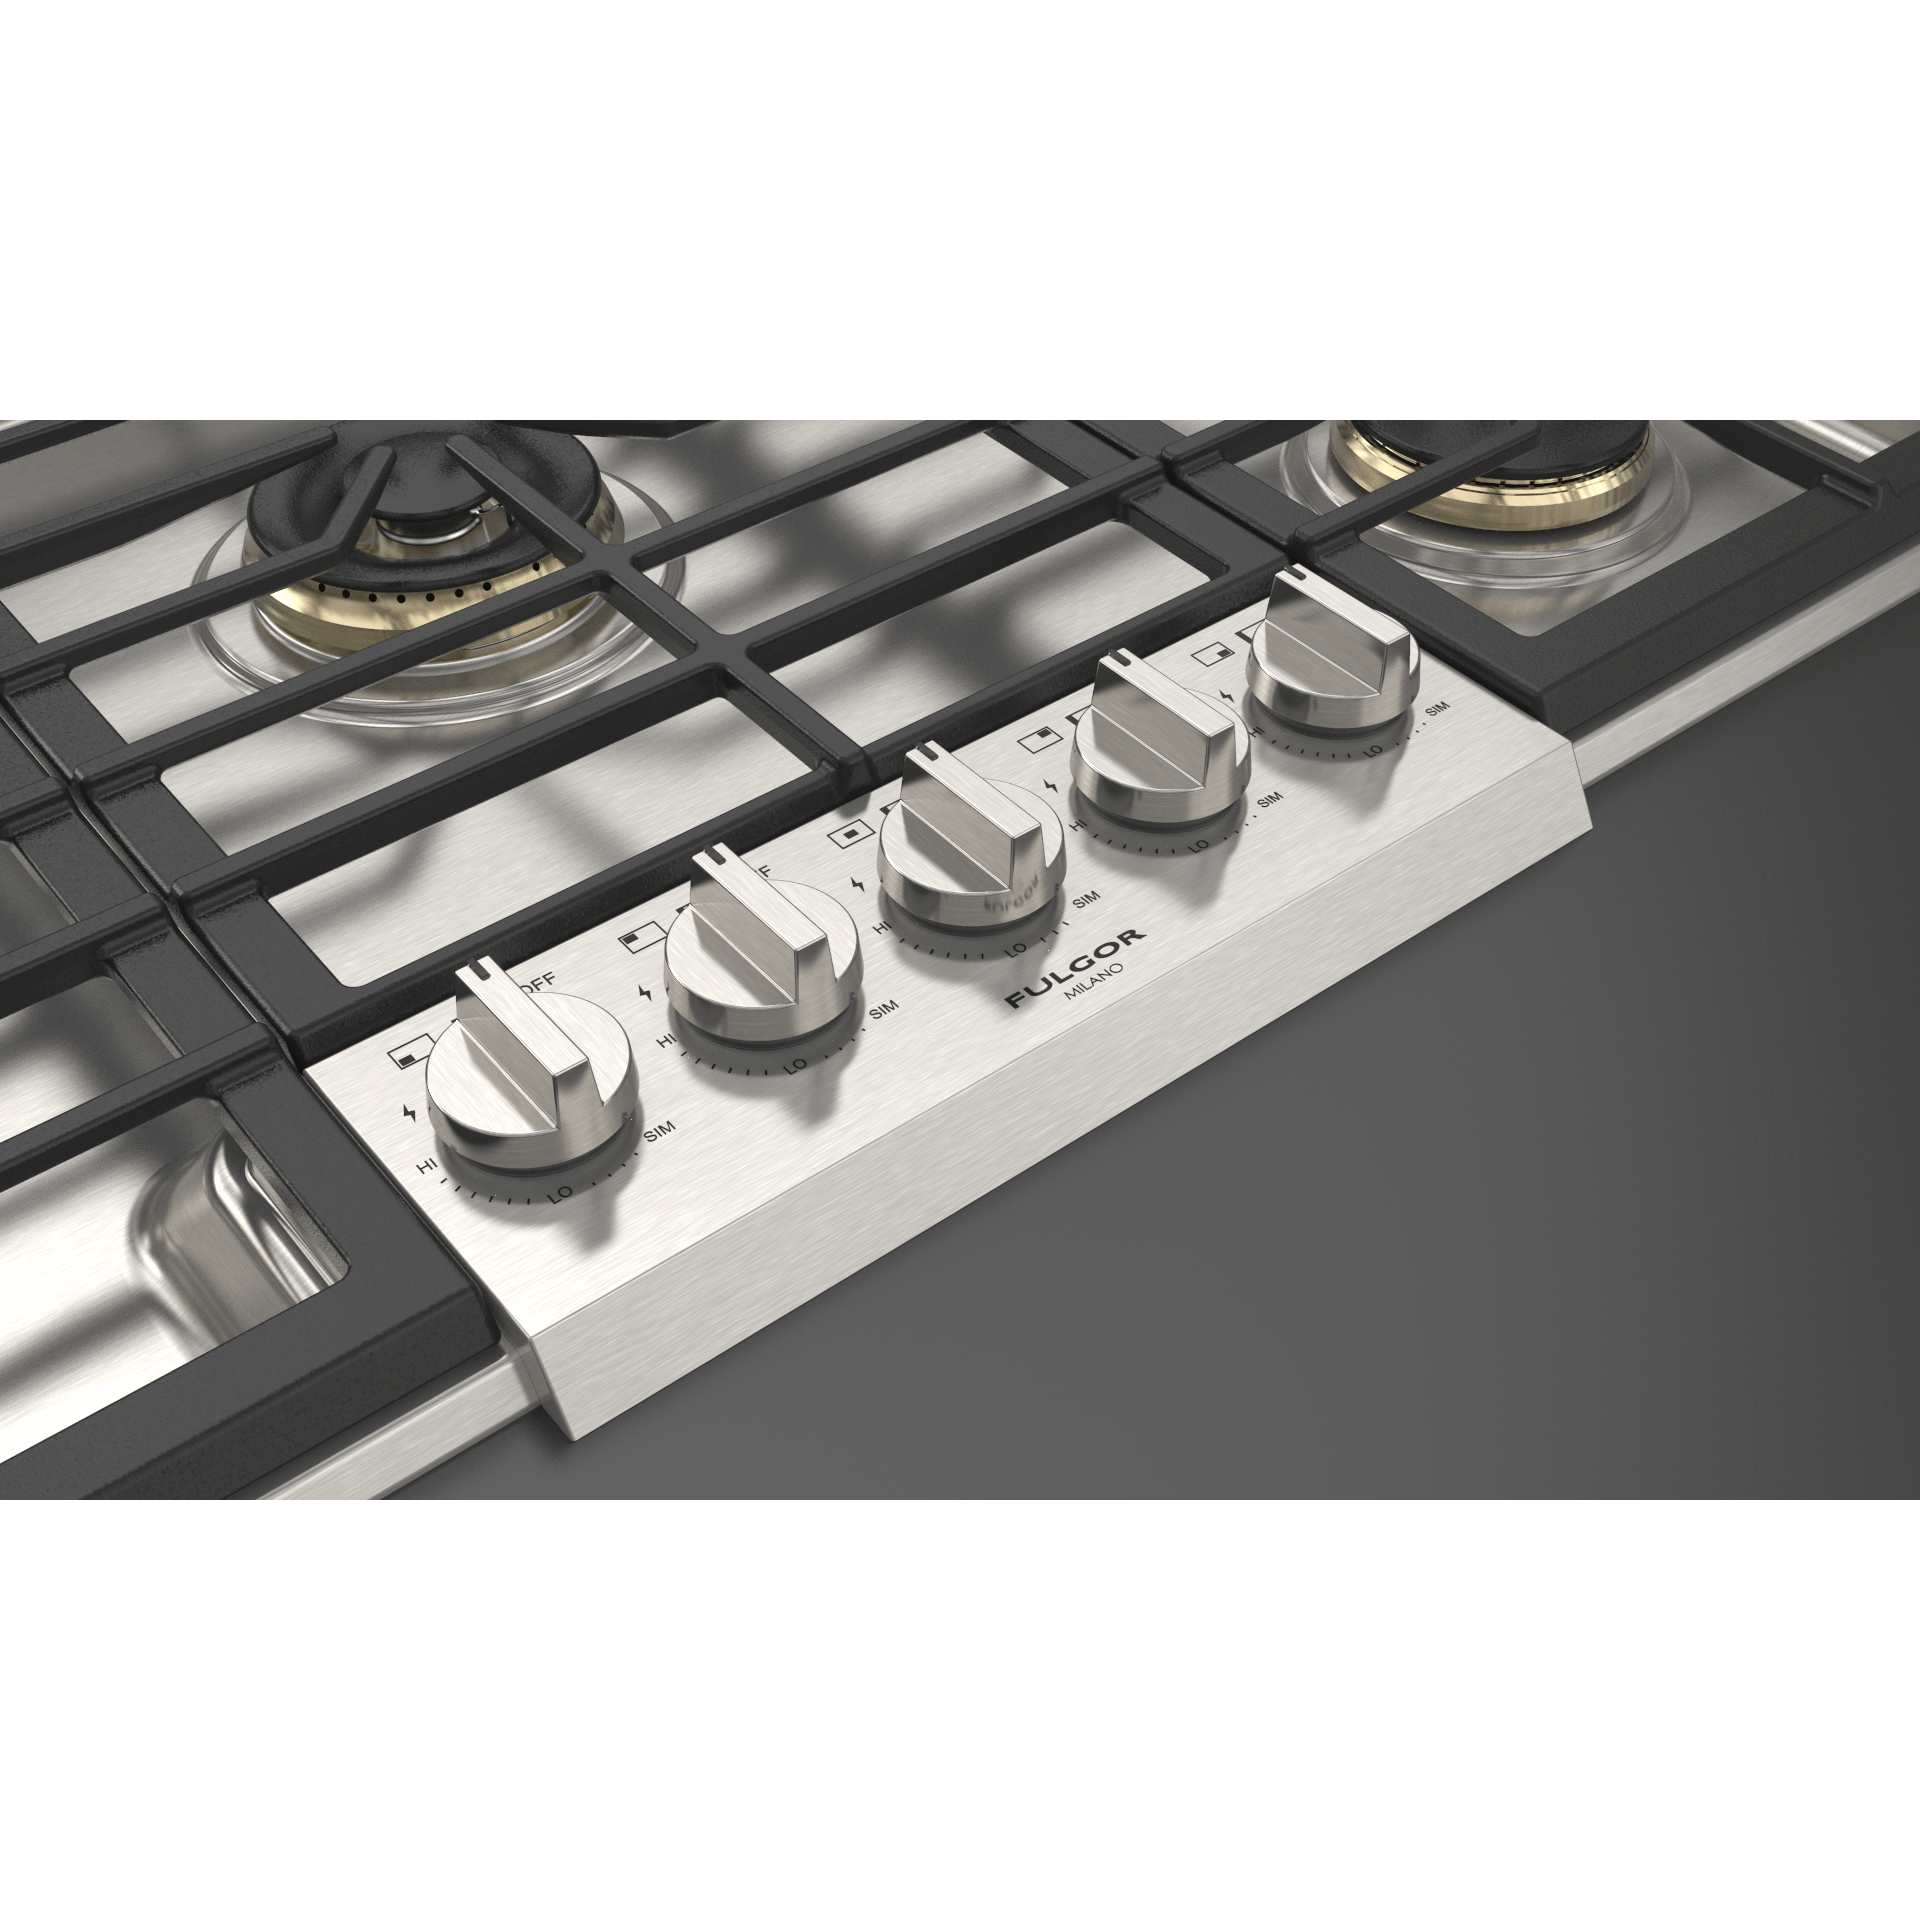 Fulgor Milano 36" Pro-Style Natural Gas Cooktop with 1 Solid Brass Dual-Flame Burner - F6PGK365S1 Cooktops F6PGK365S1 Luxury Appliances Direct